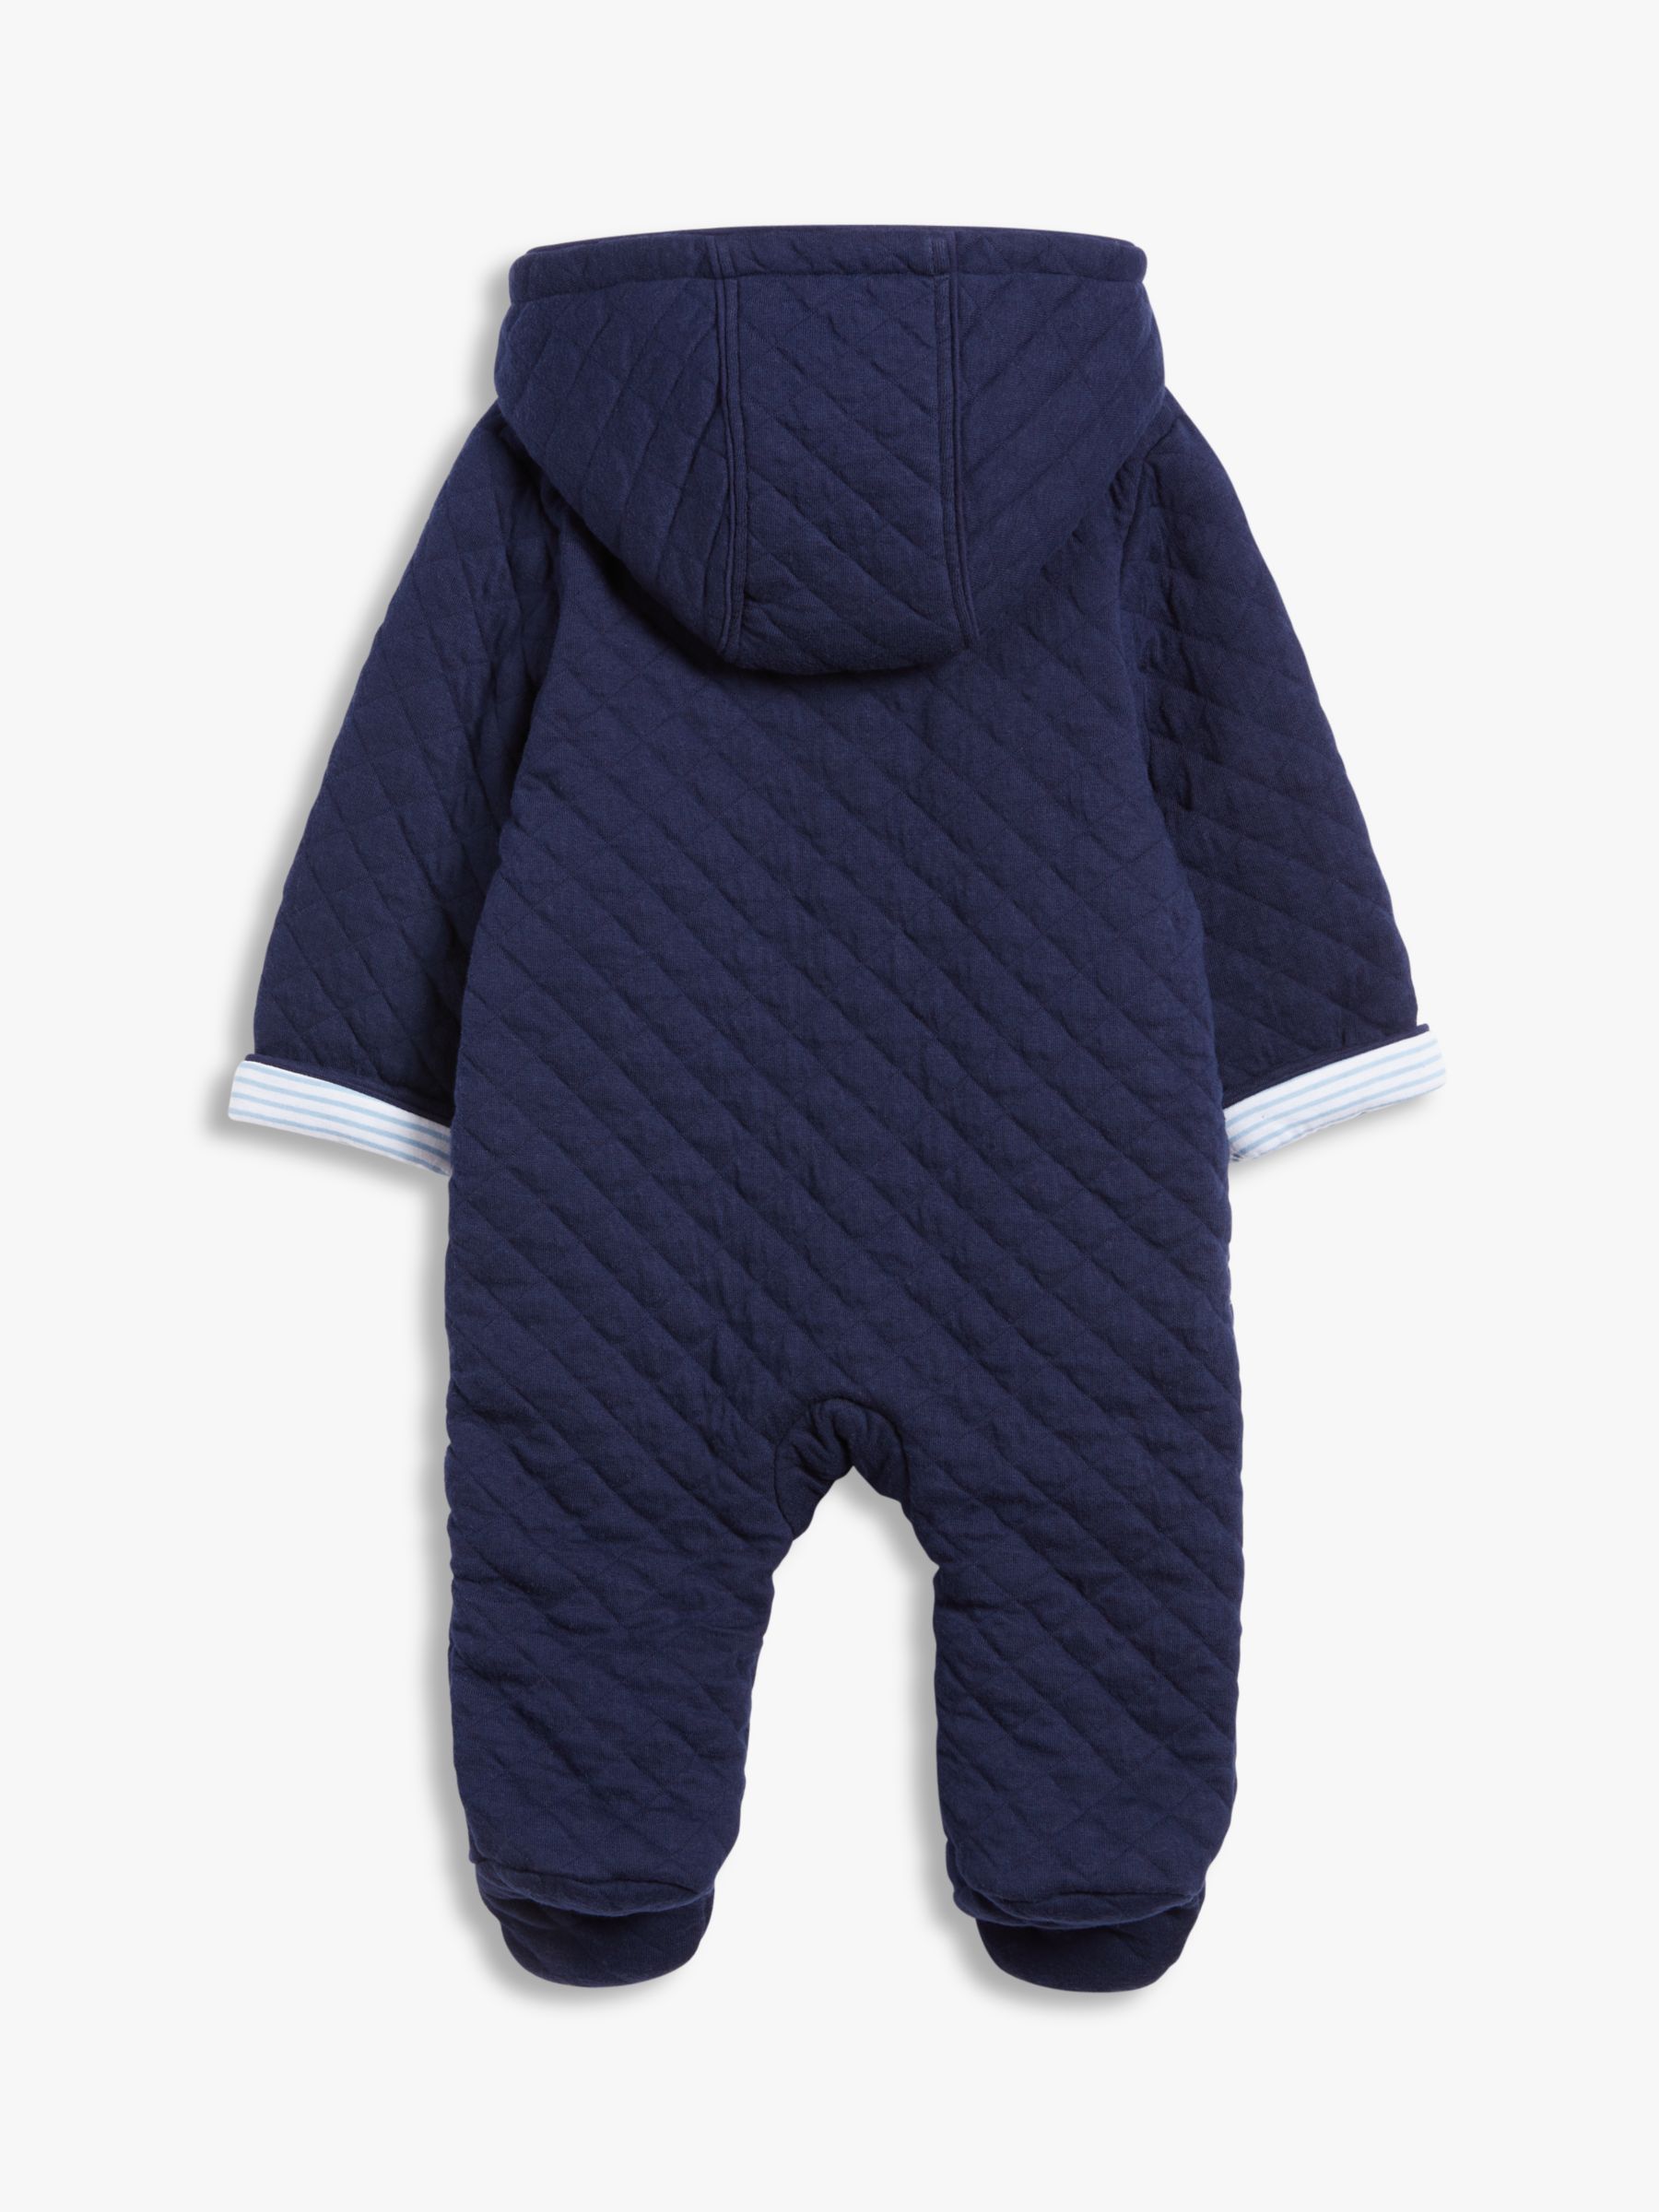 John Lewis Baby Quilt Wadded Pramsuit, Navy, Tiny Baby